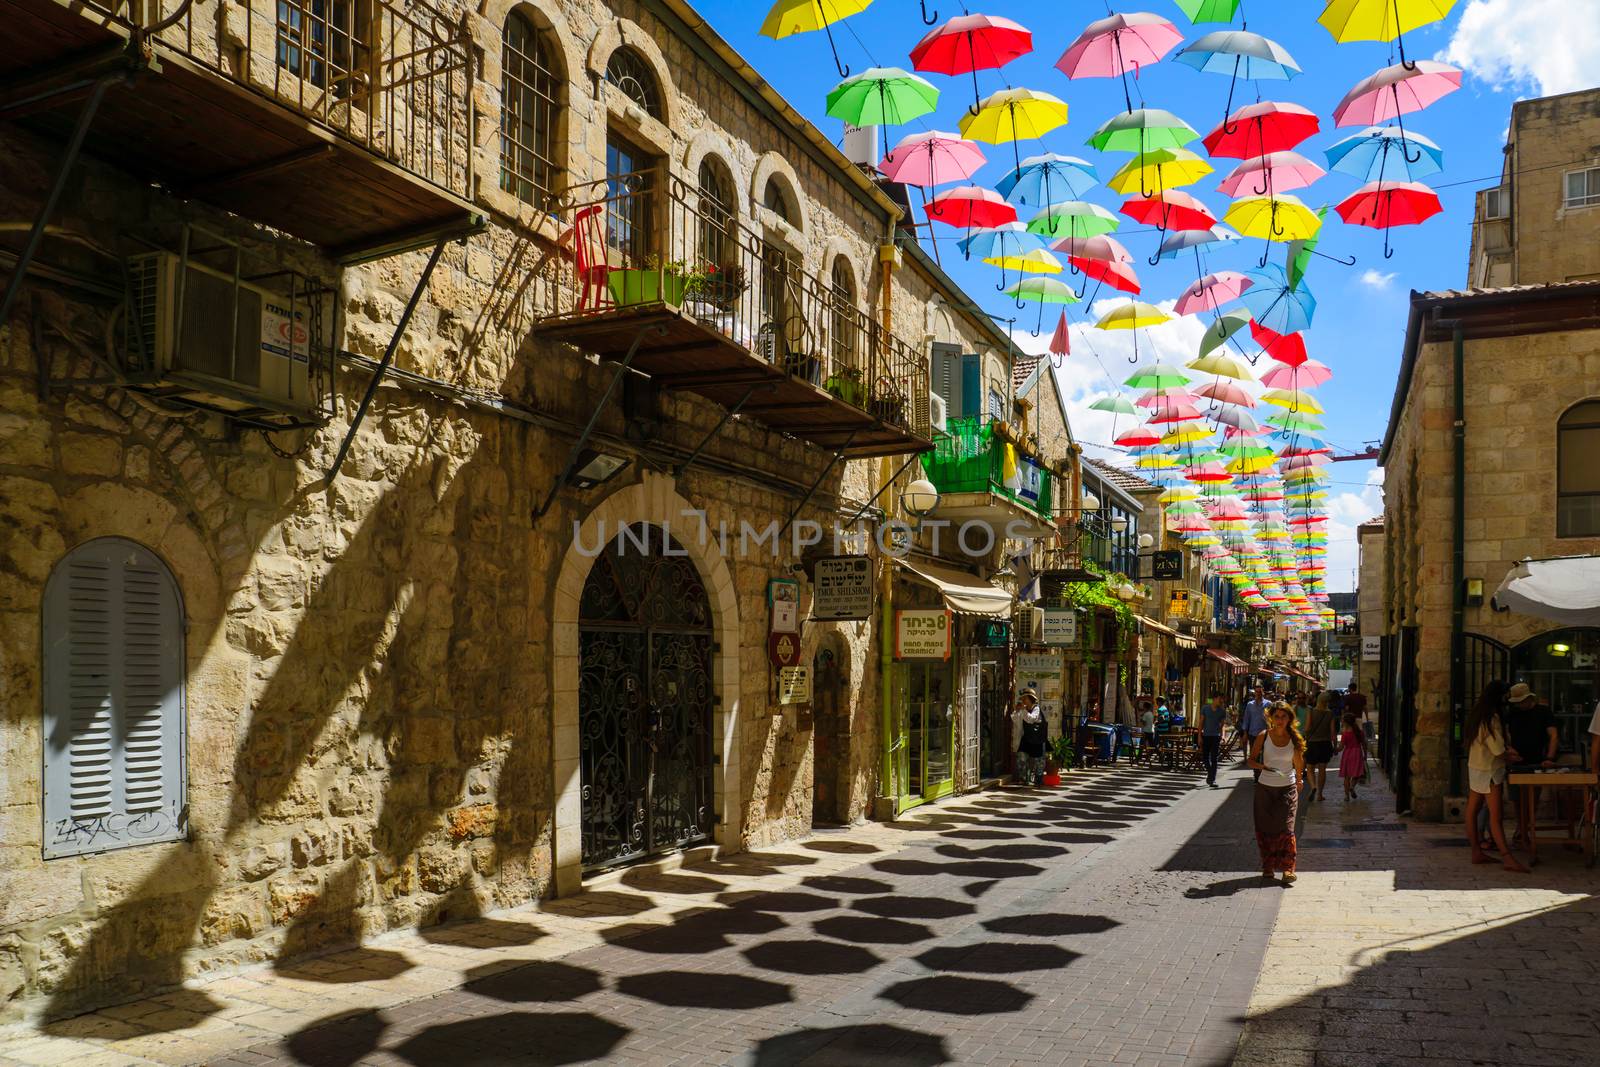 JERUSALEM, ISRAEL - SEPTEMBER 23, 2016: Scene of Yoel Moshe Solomon Street, decorated with colorful umbrellas, with locals and visitors, in the historic Nachalat Shiva district, Jerusalem, Israel